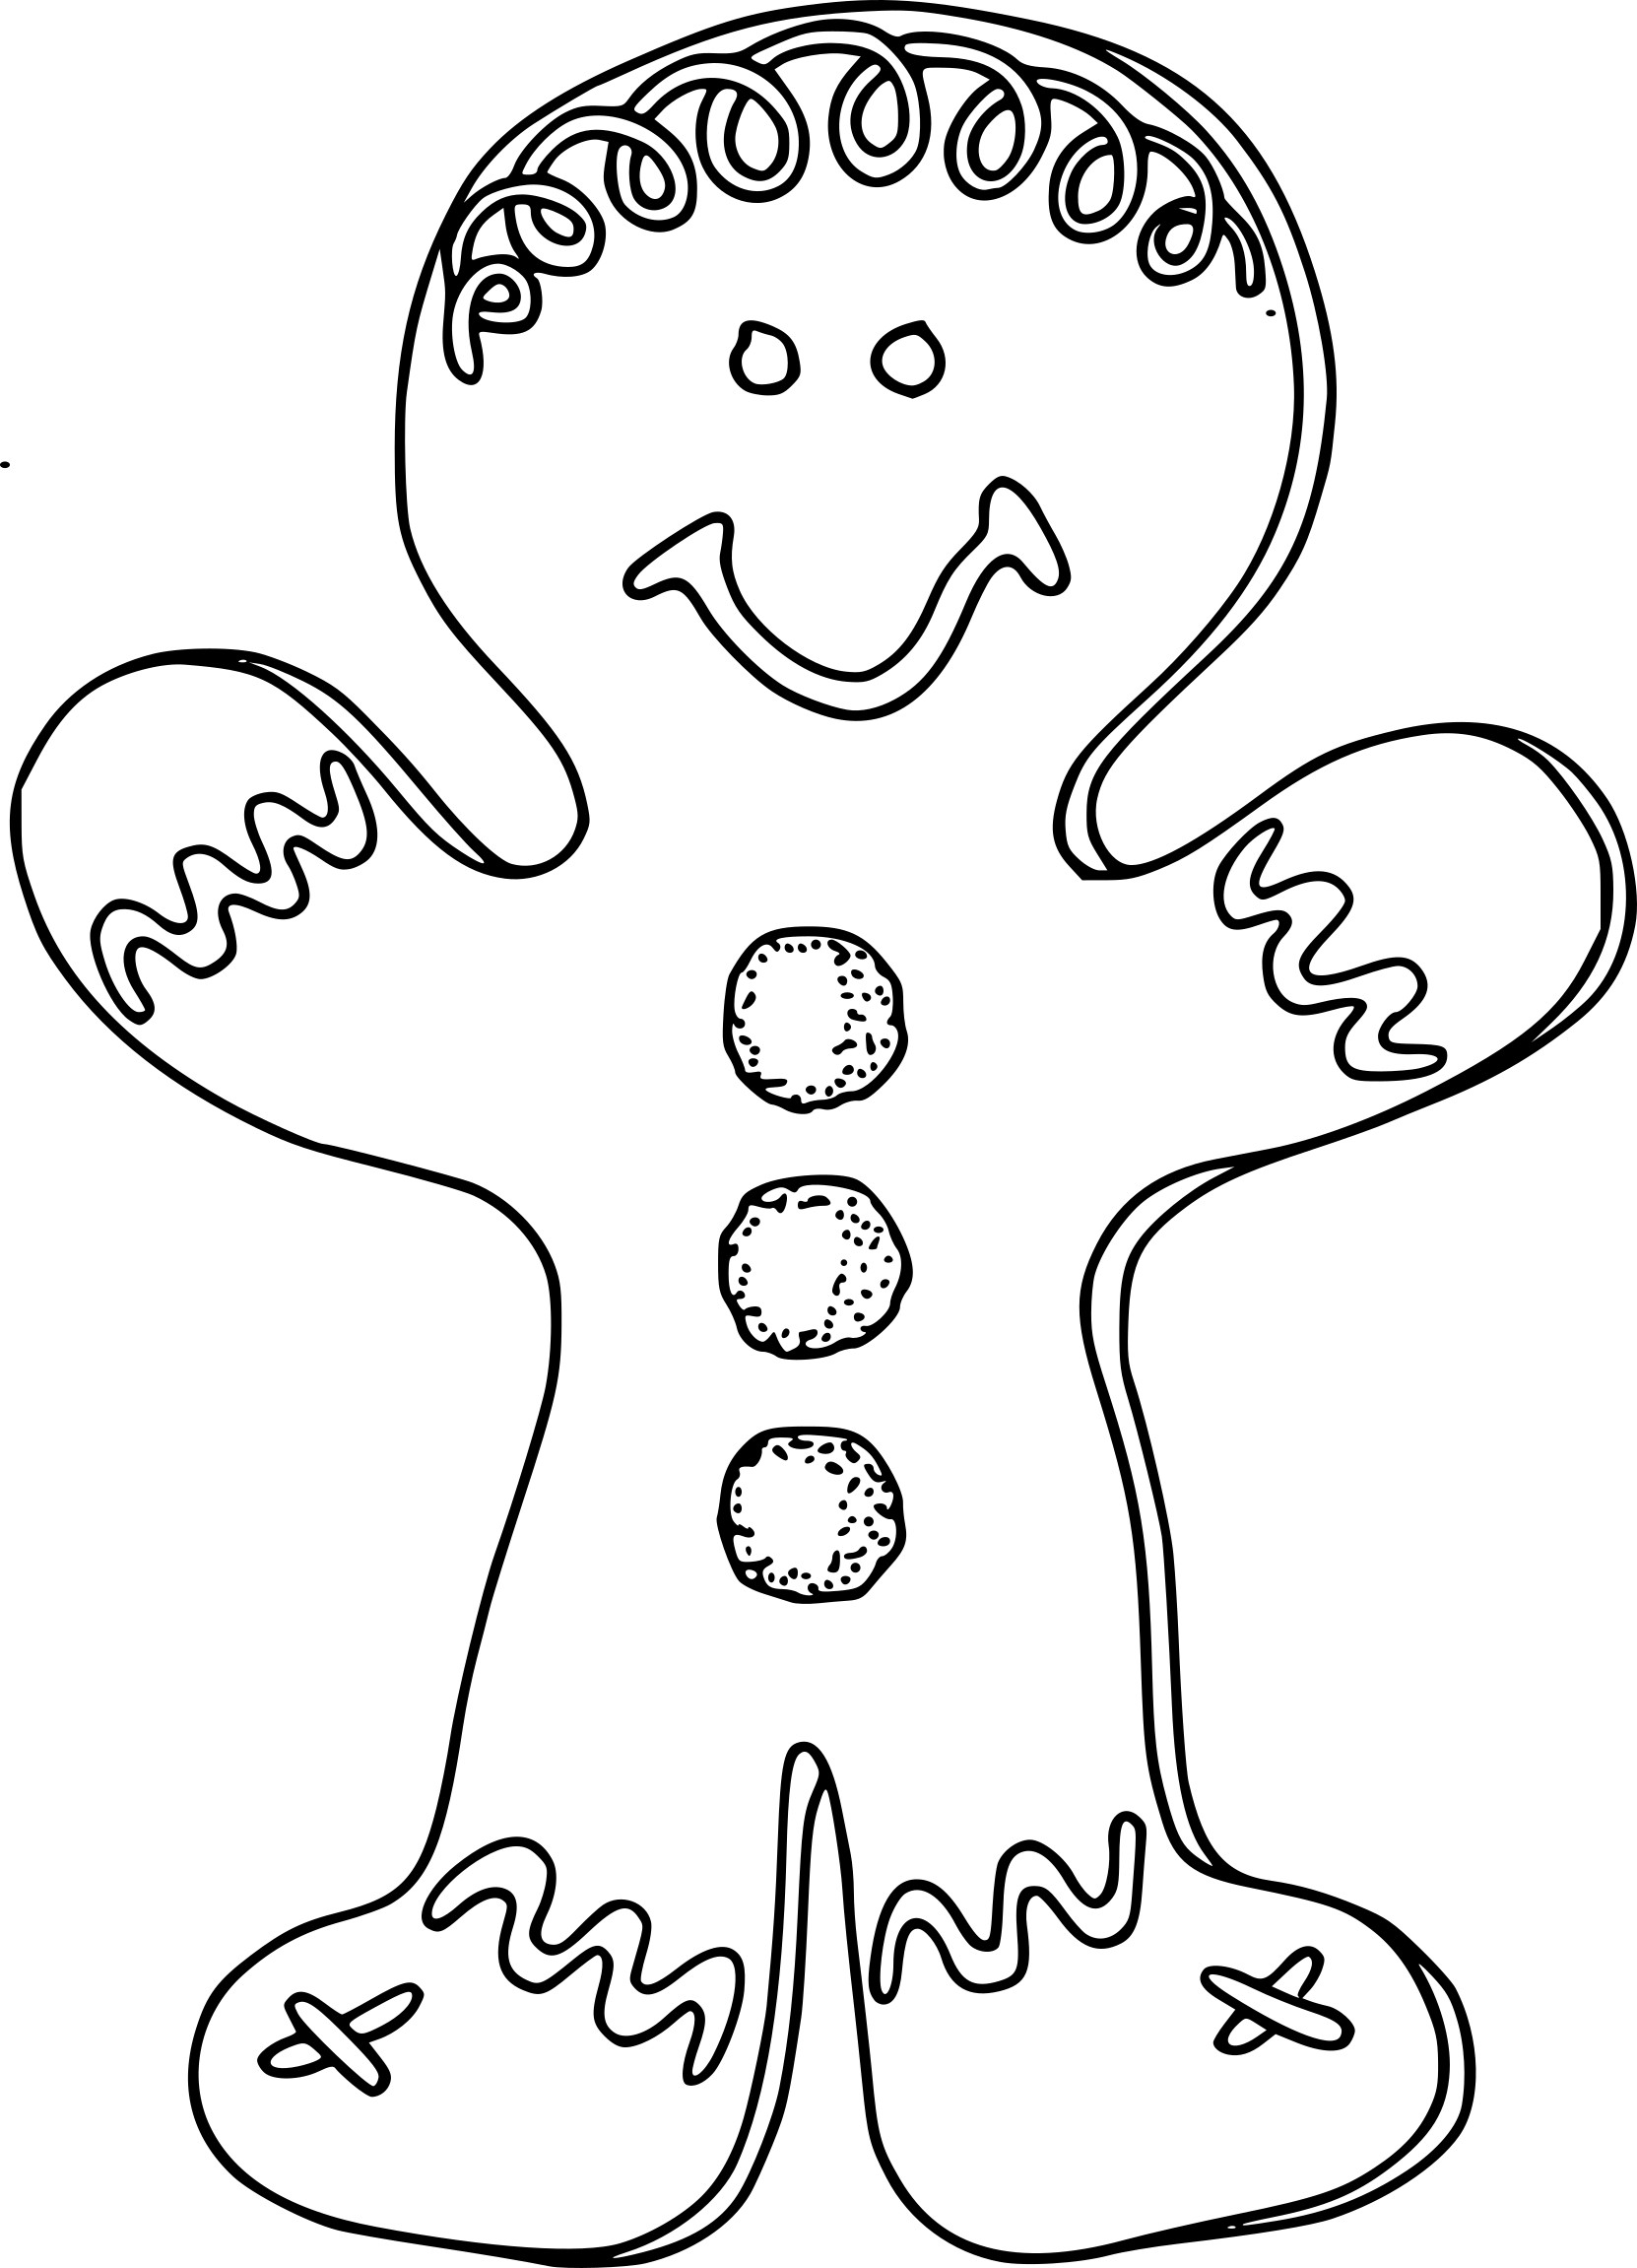 Gingerbread Christmas coloring page